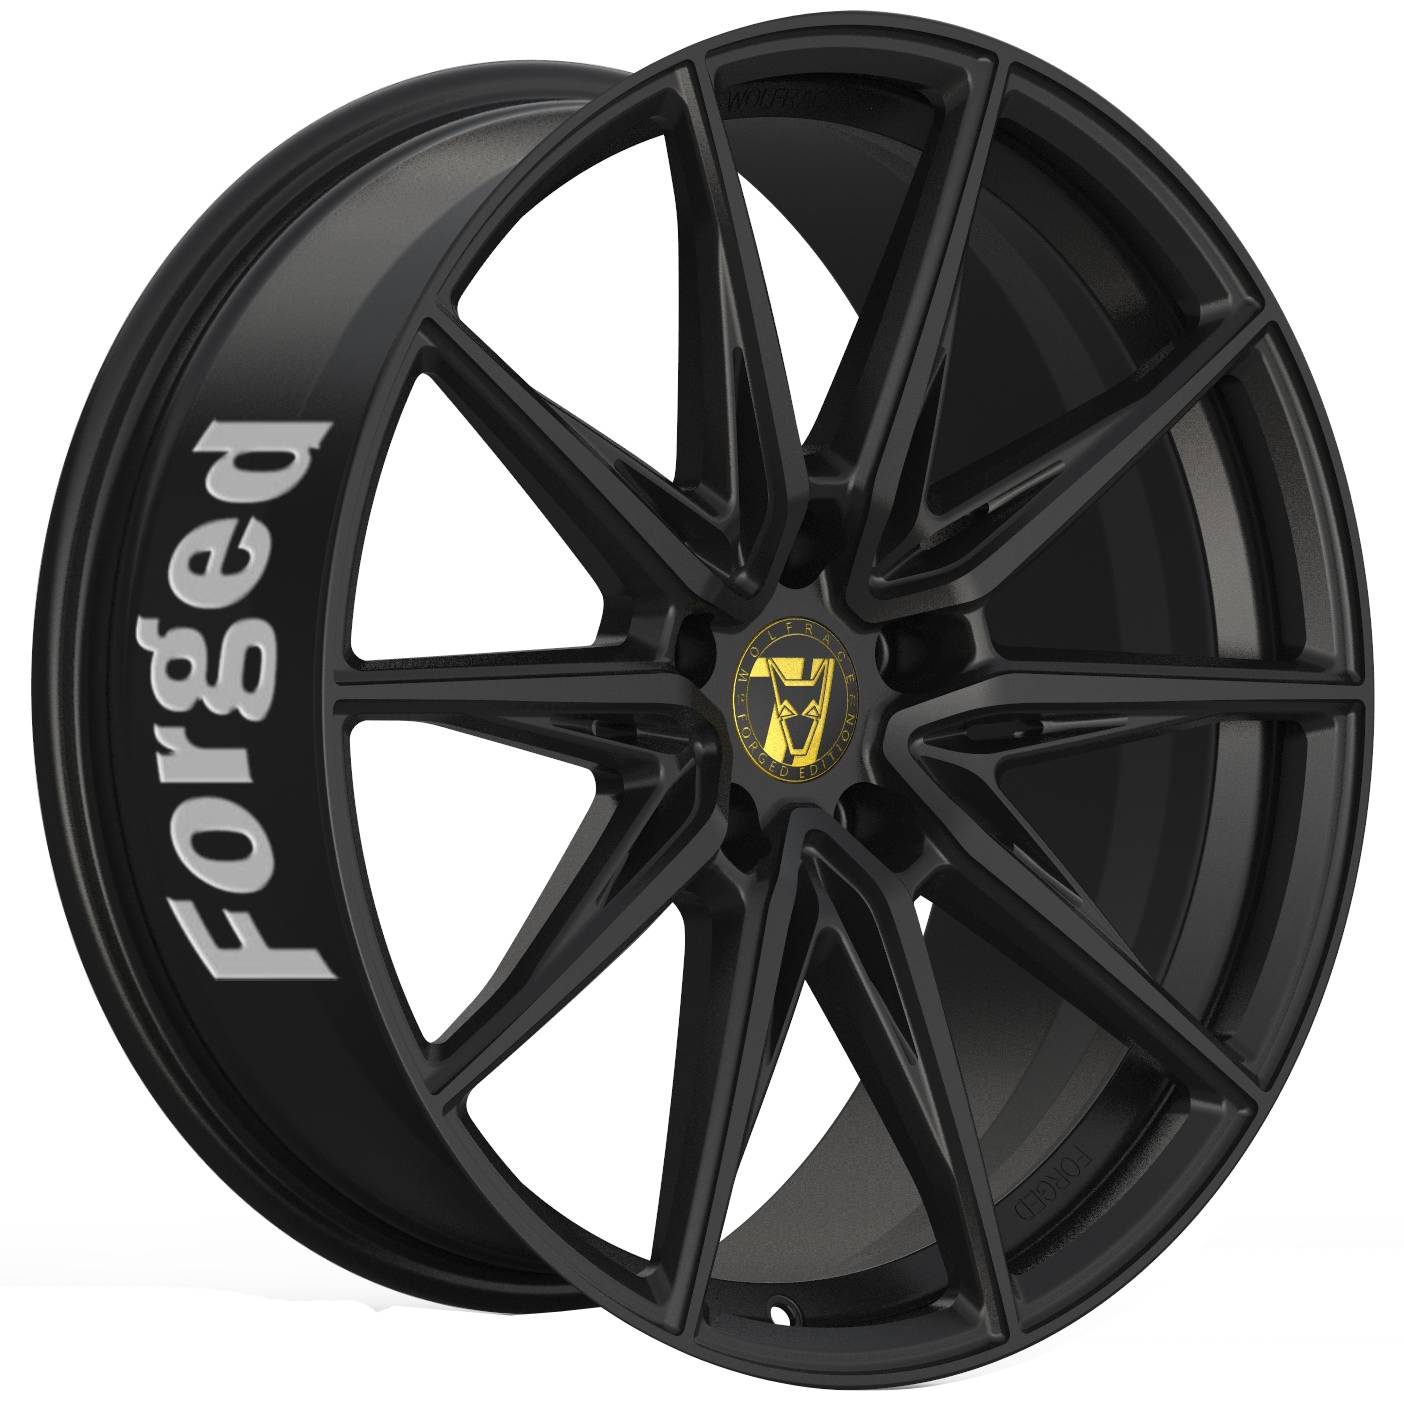 Demon Wheels 71 Forged Edition Urban Racer Forged [11x23] -5x114.3- ET 20